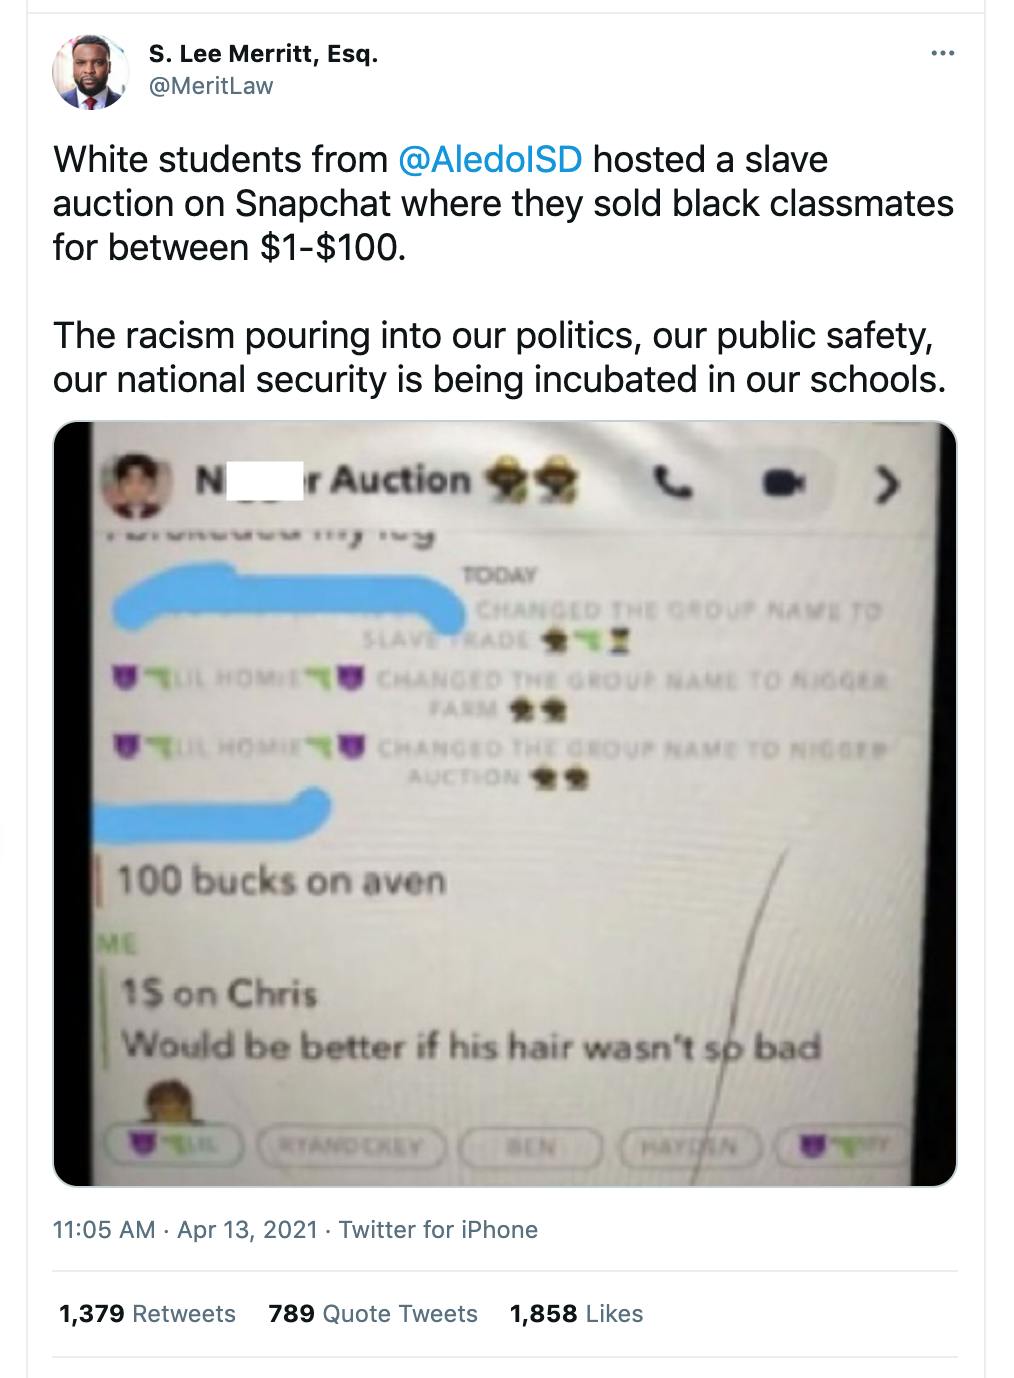 snapchat image of students discussing slave auction